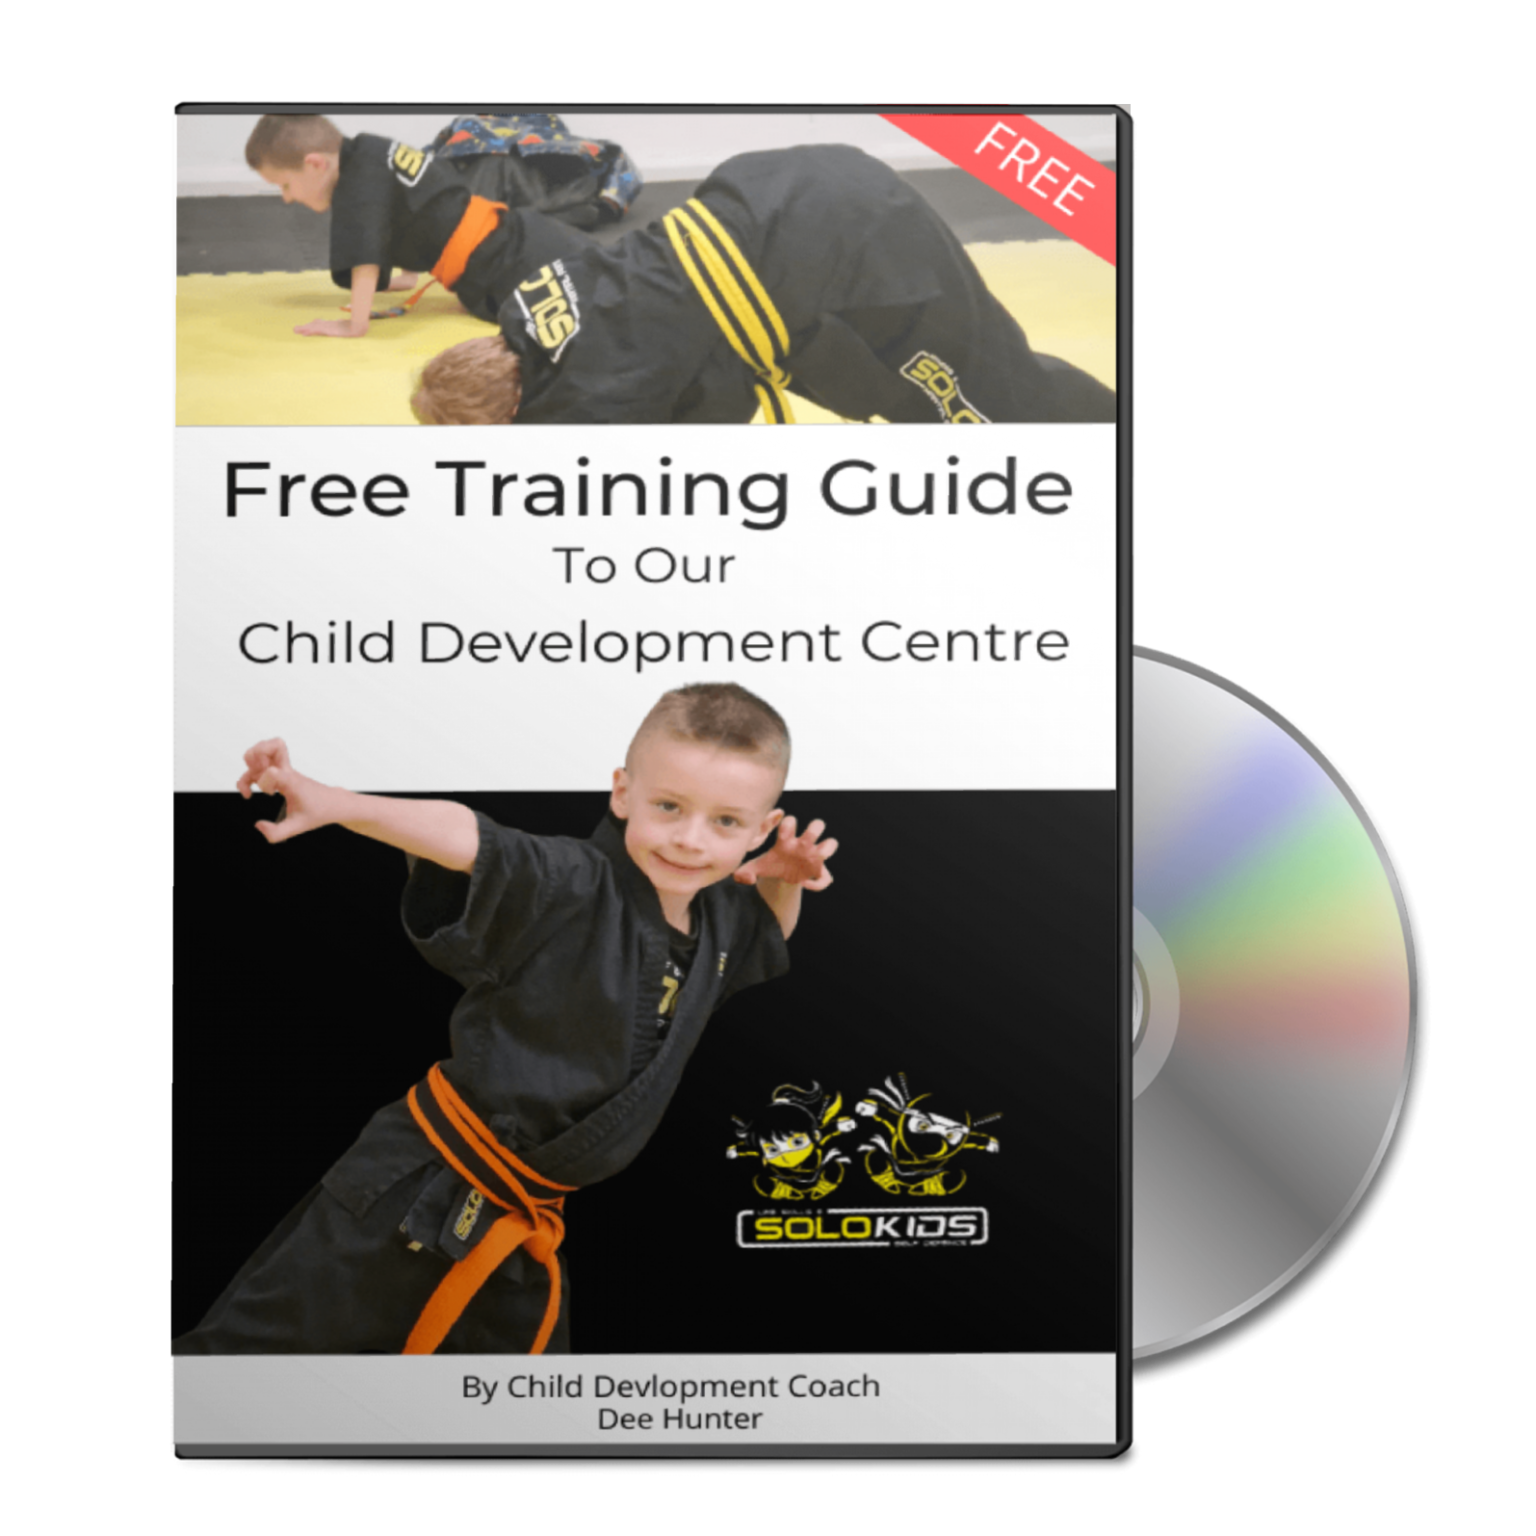 training guide for children's martial arts classes